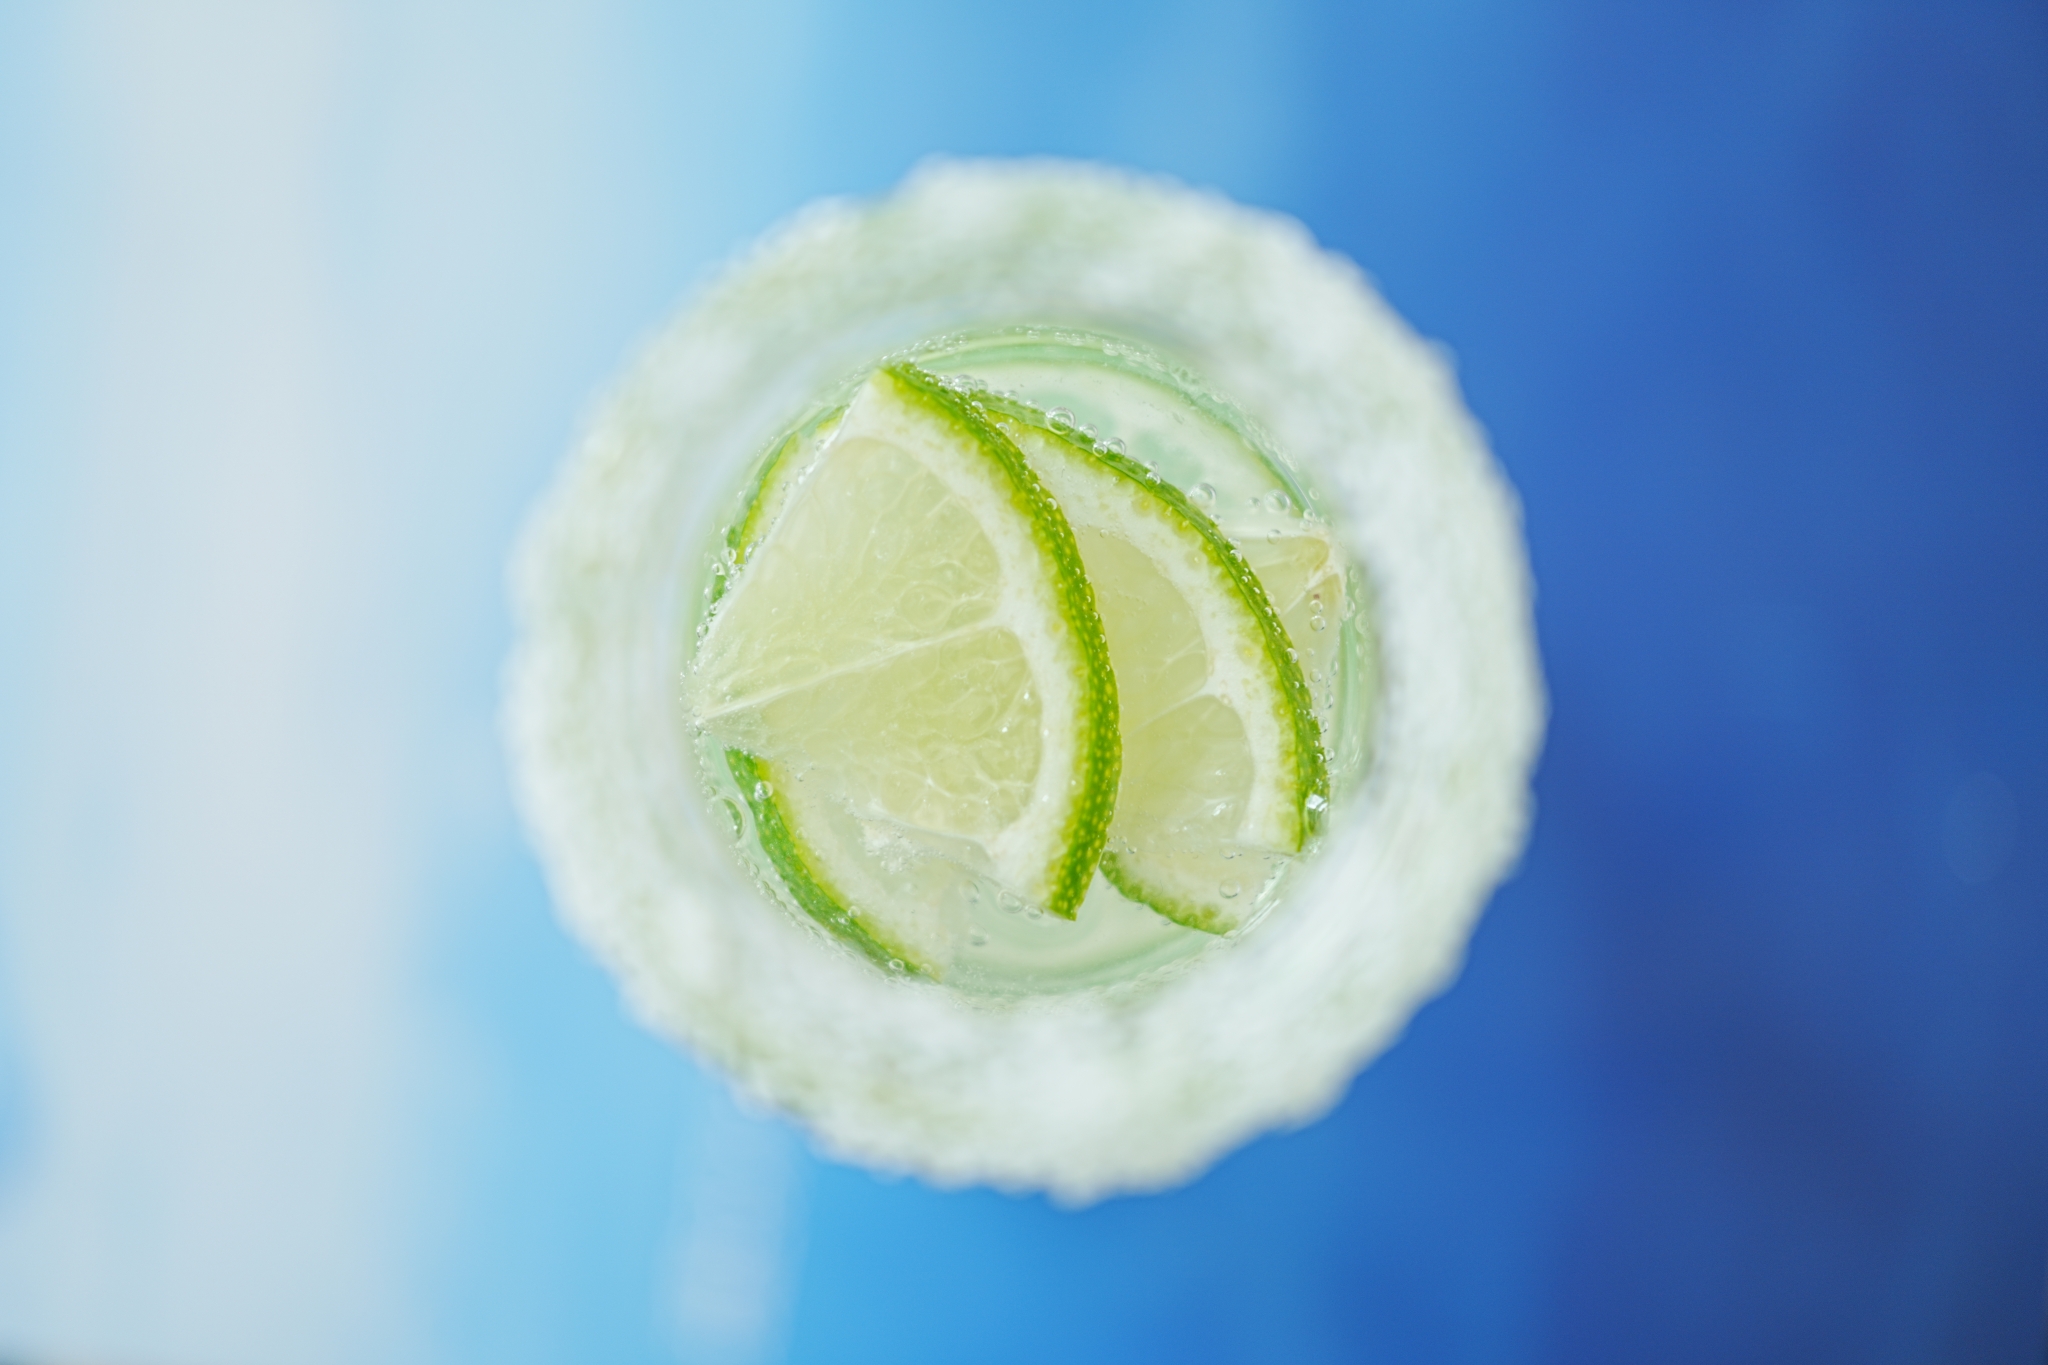 Arial shot of slices of lime on top of a margarita cocktail with a shallow depth of field